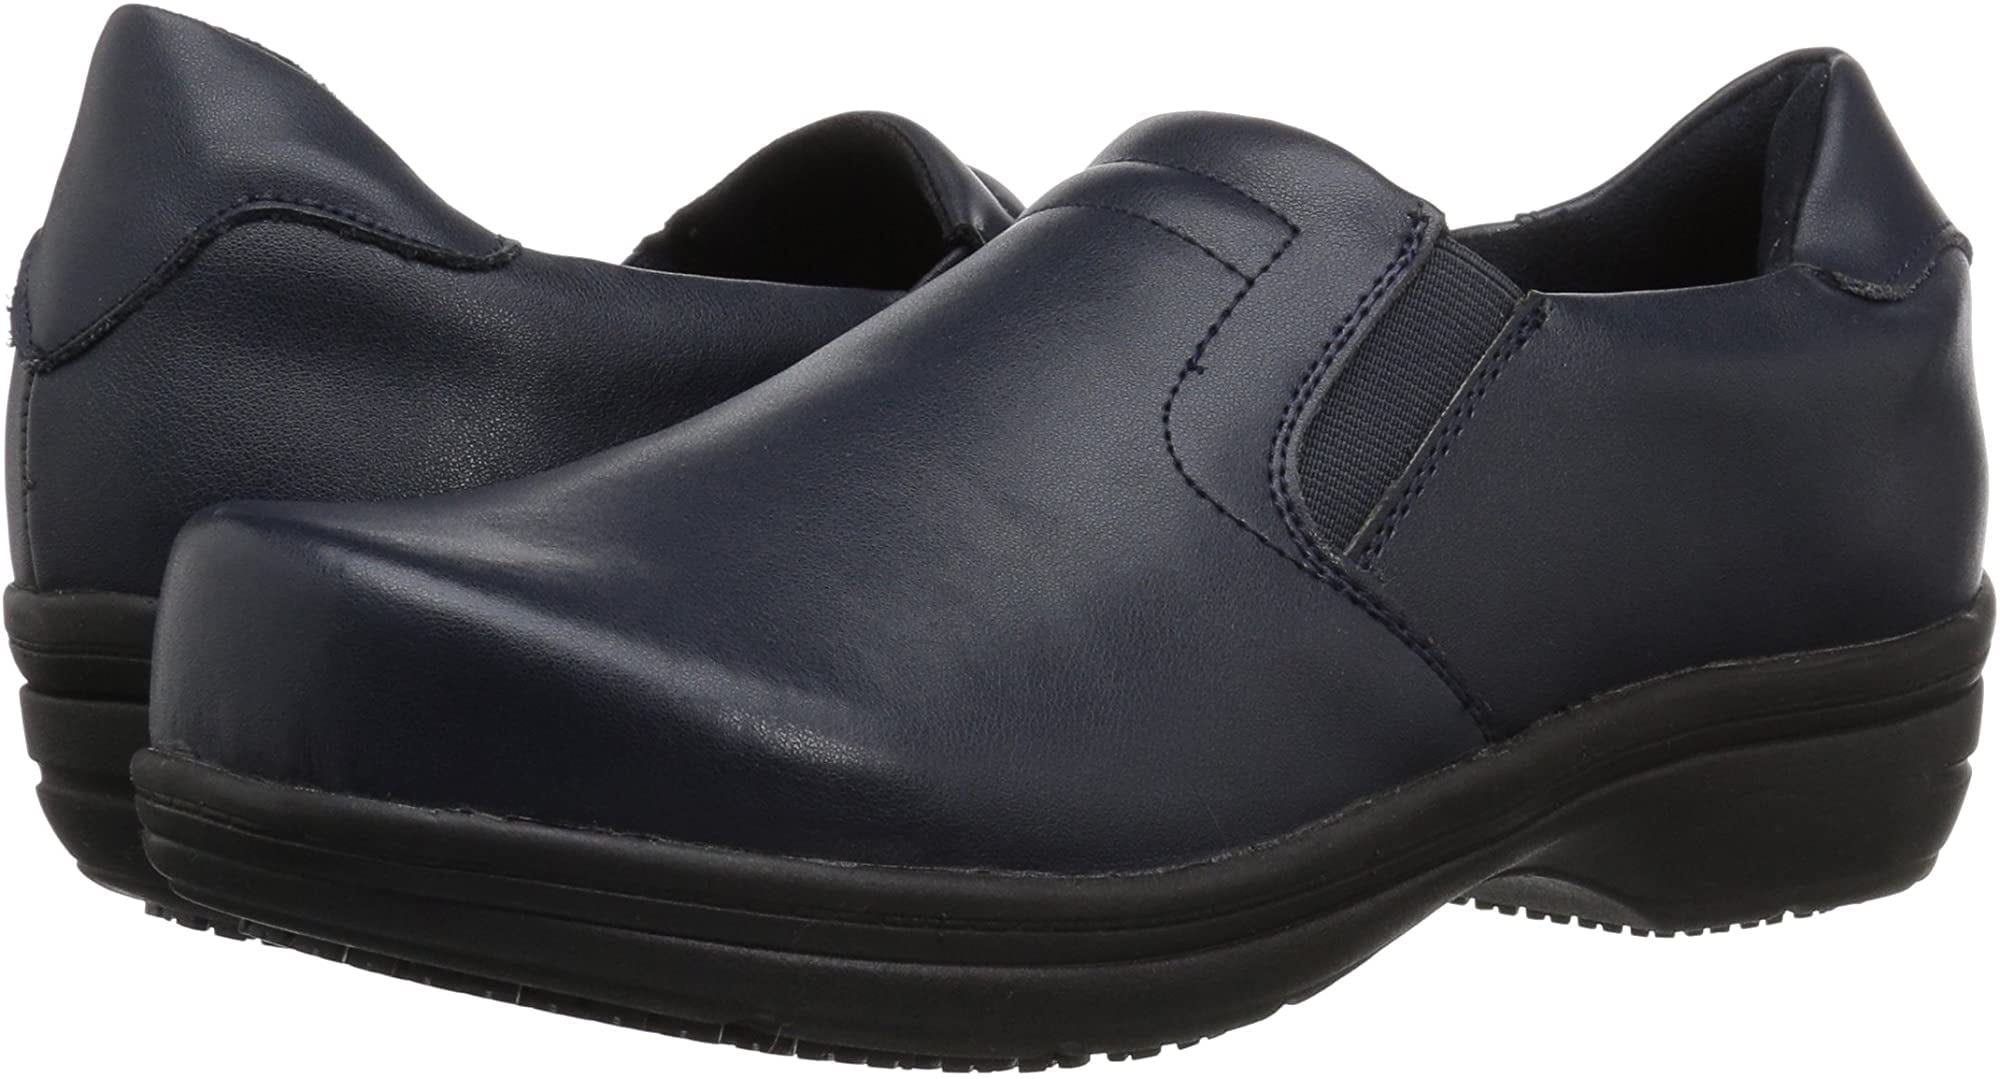 Easy Works Women's Bind Health Care Professional Shoe 